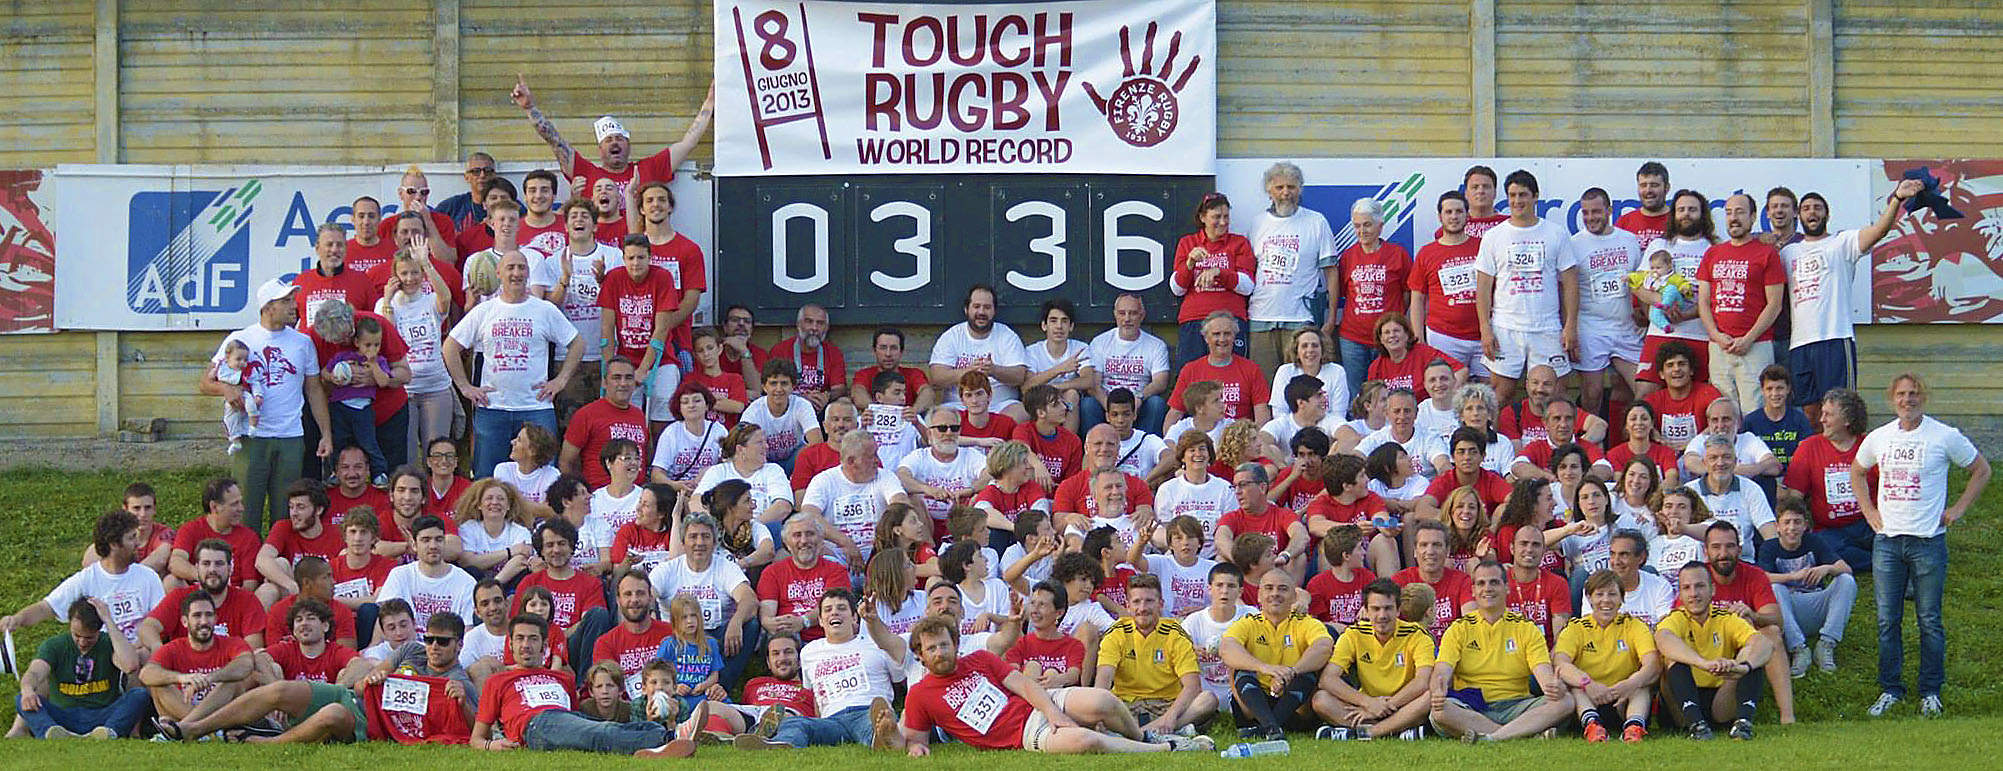 Battuto il touch rugby world record